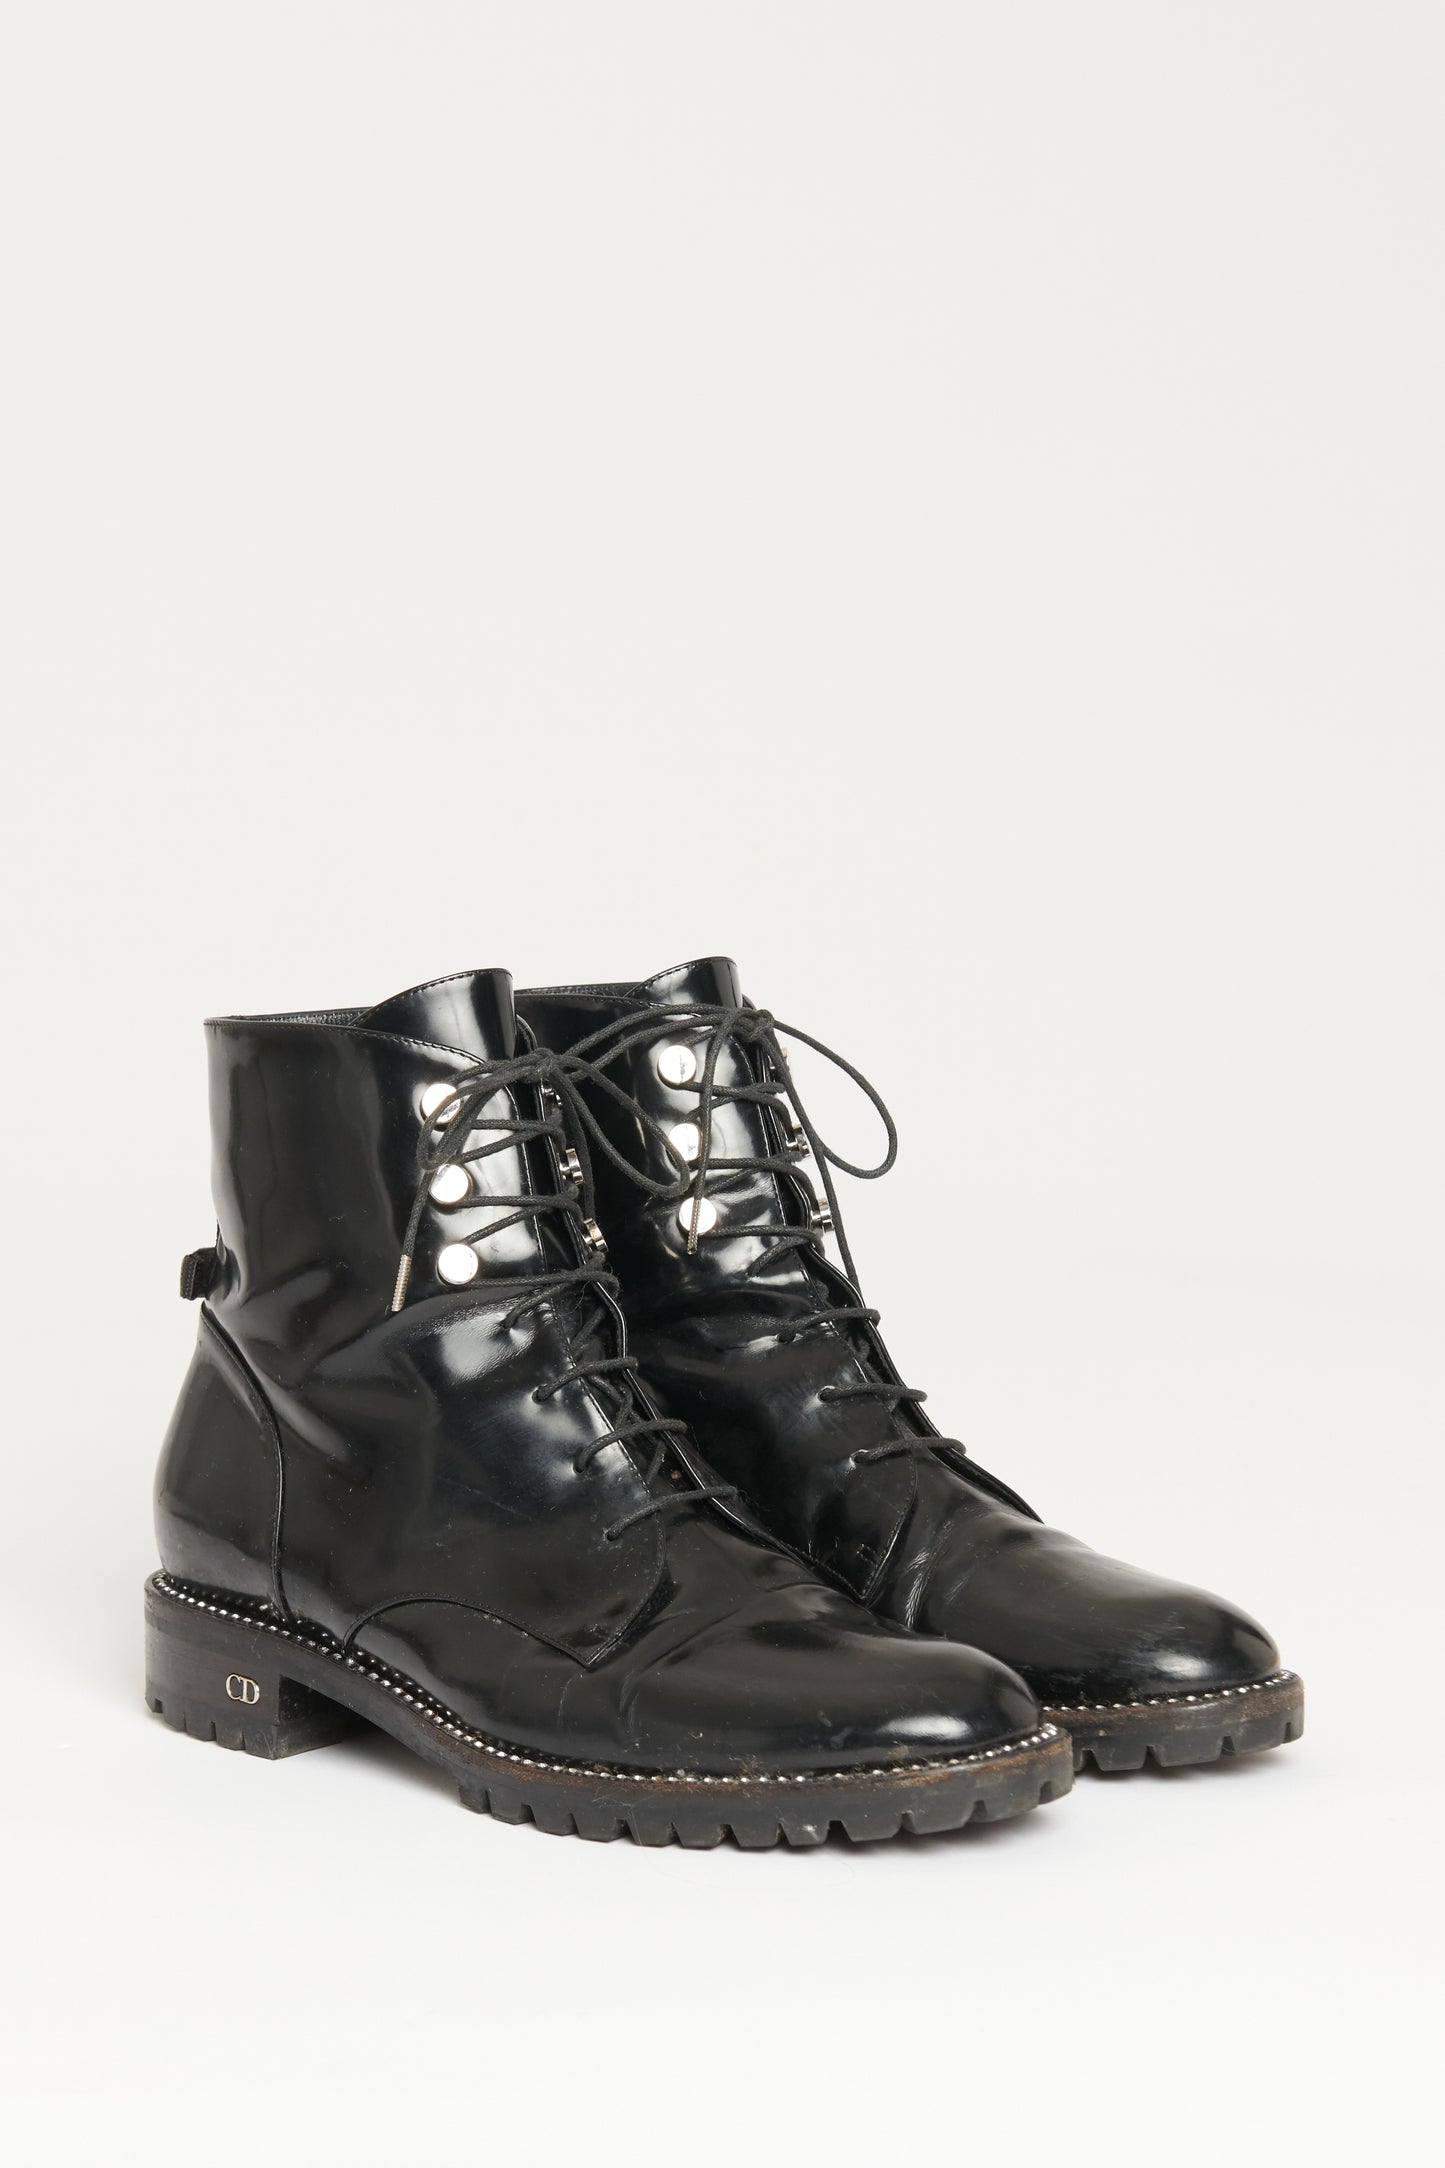 2017 Black Glazed Calfskin Preowned Lace Up Crystal Trimmed Boots